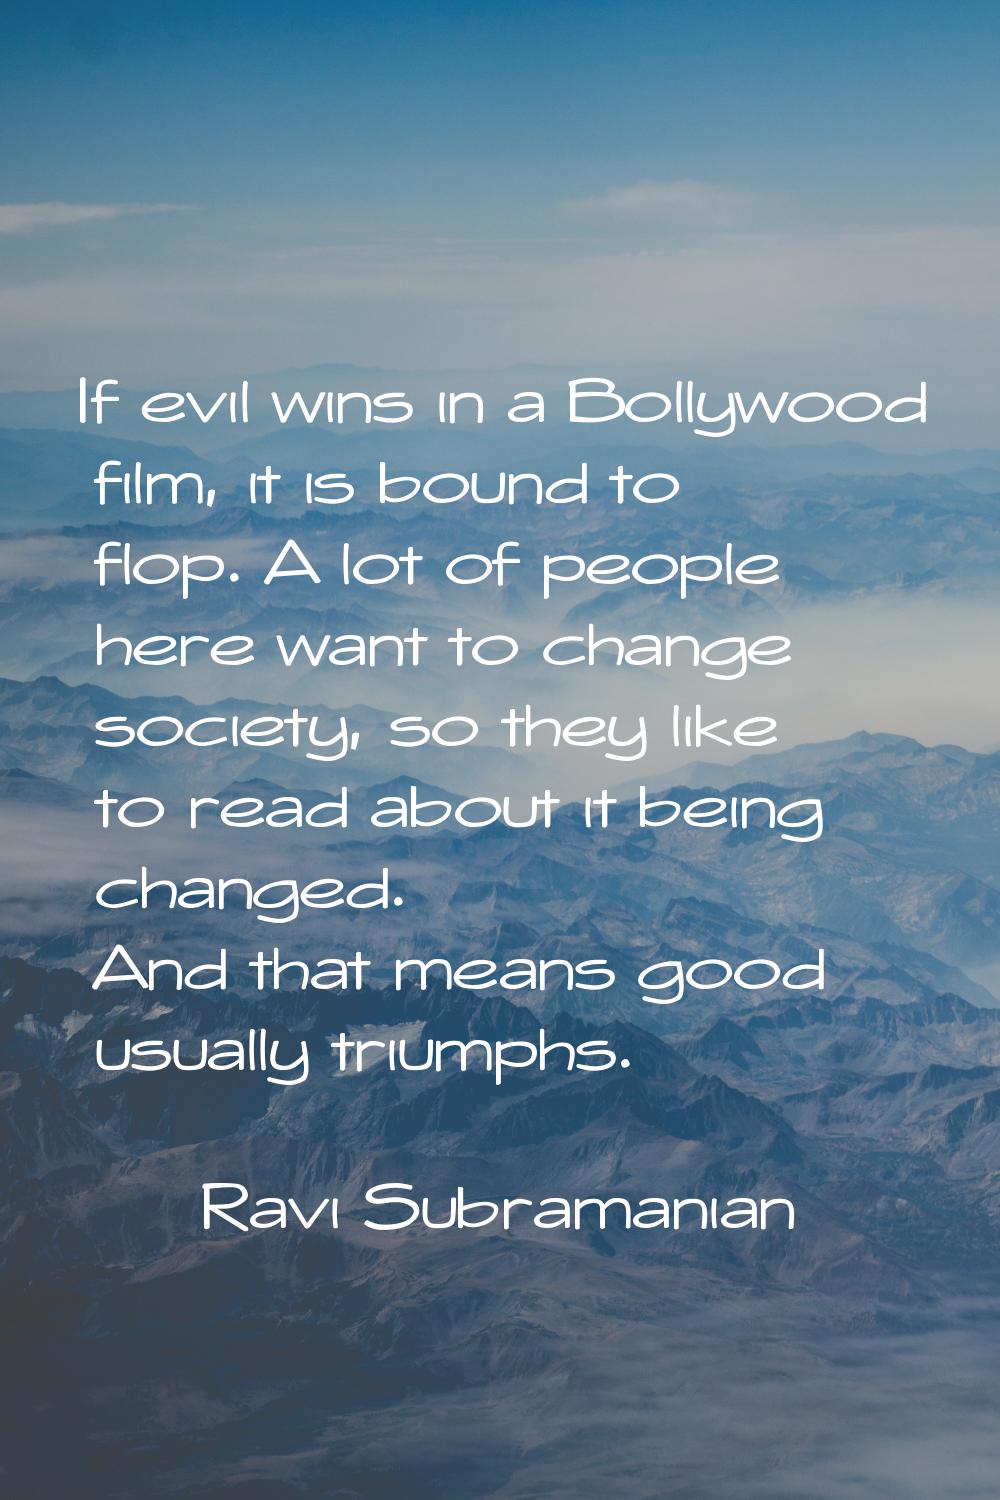 If evil wins in a Bollywood film, it is bound to flop. A lot of people here want to change society,